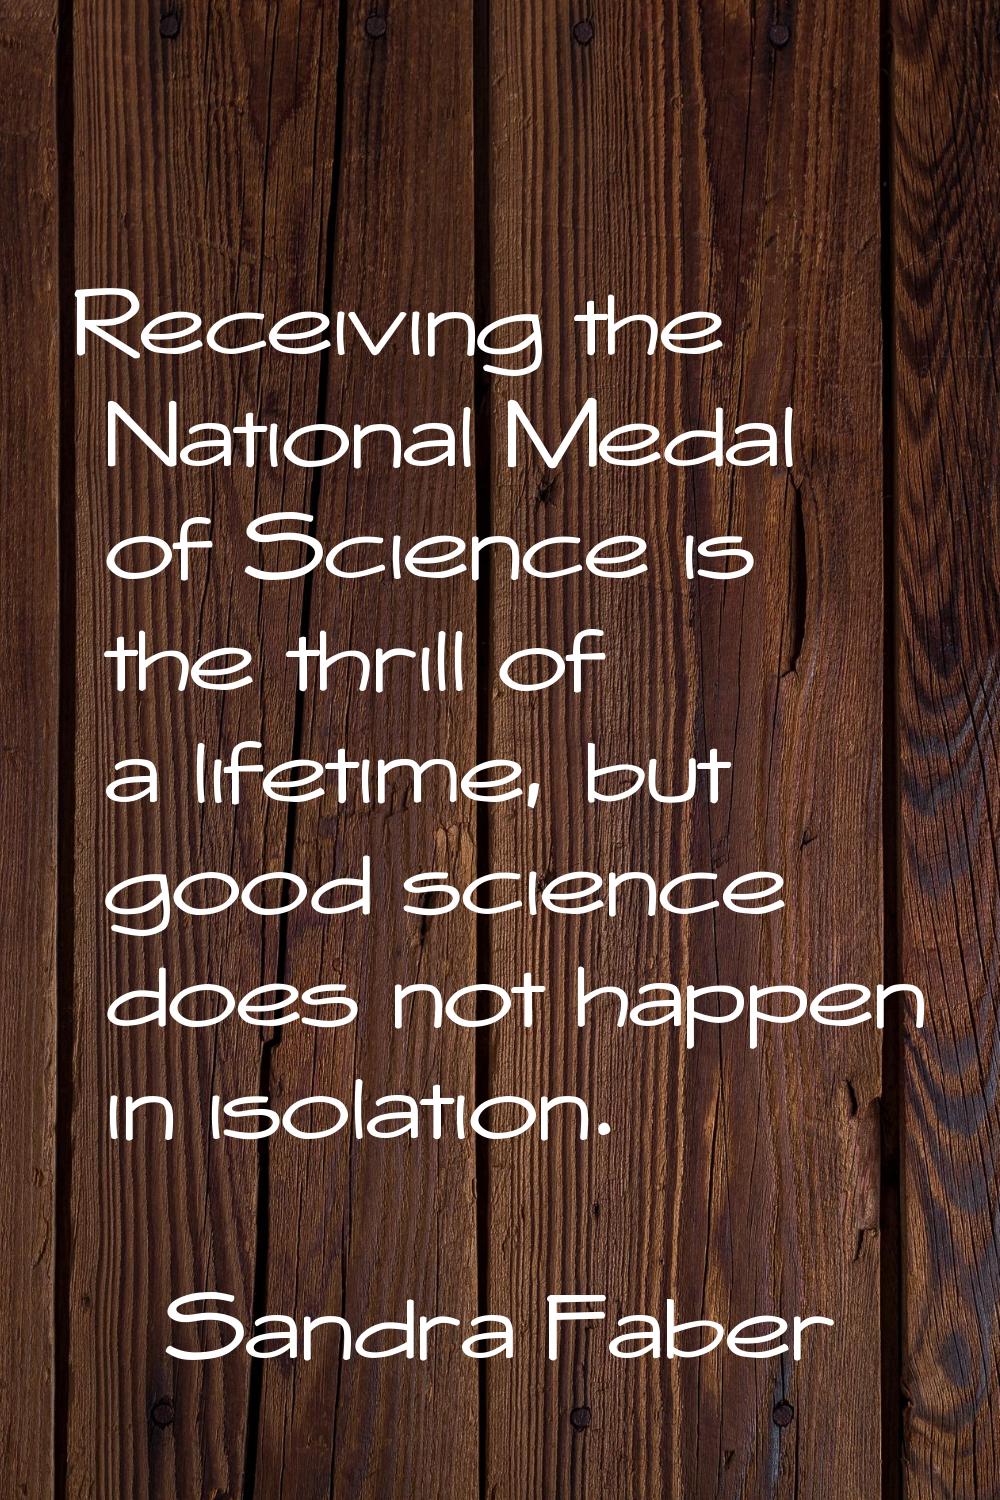 Receiving the National Medal of Science is the thrill of a lifetime, but good science does not happ